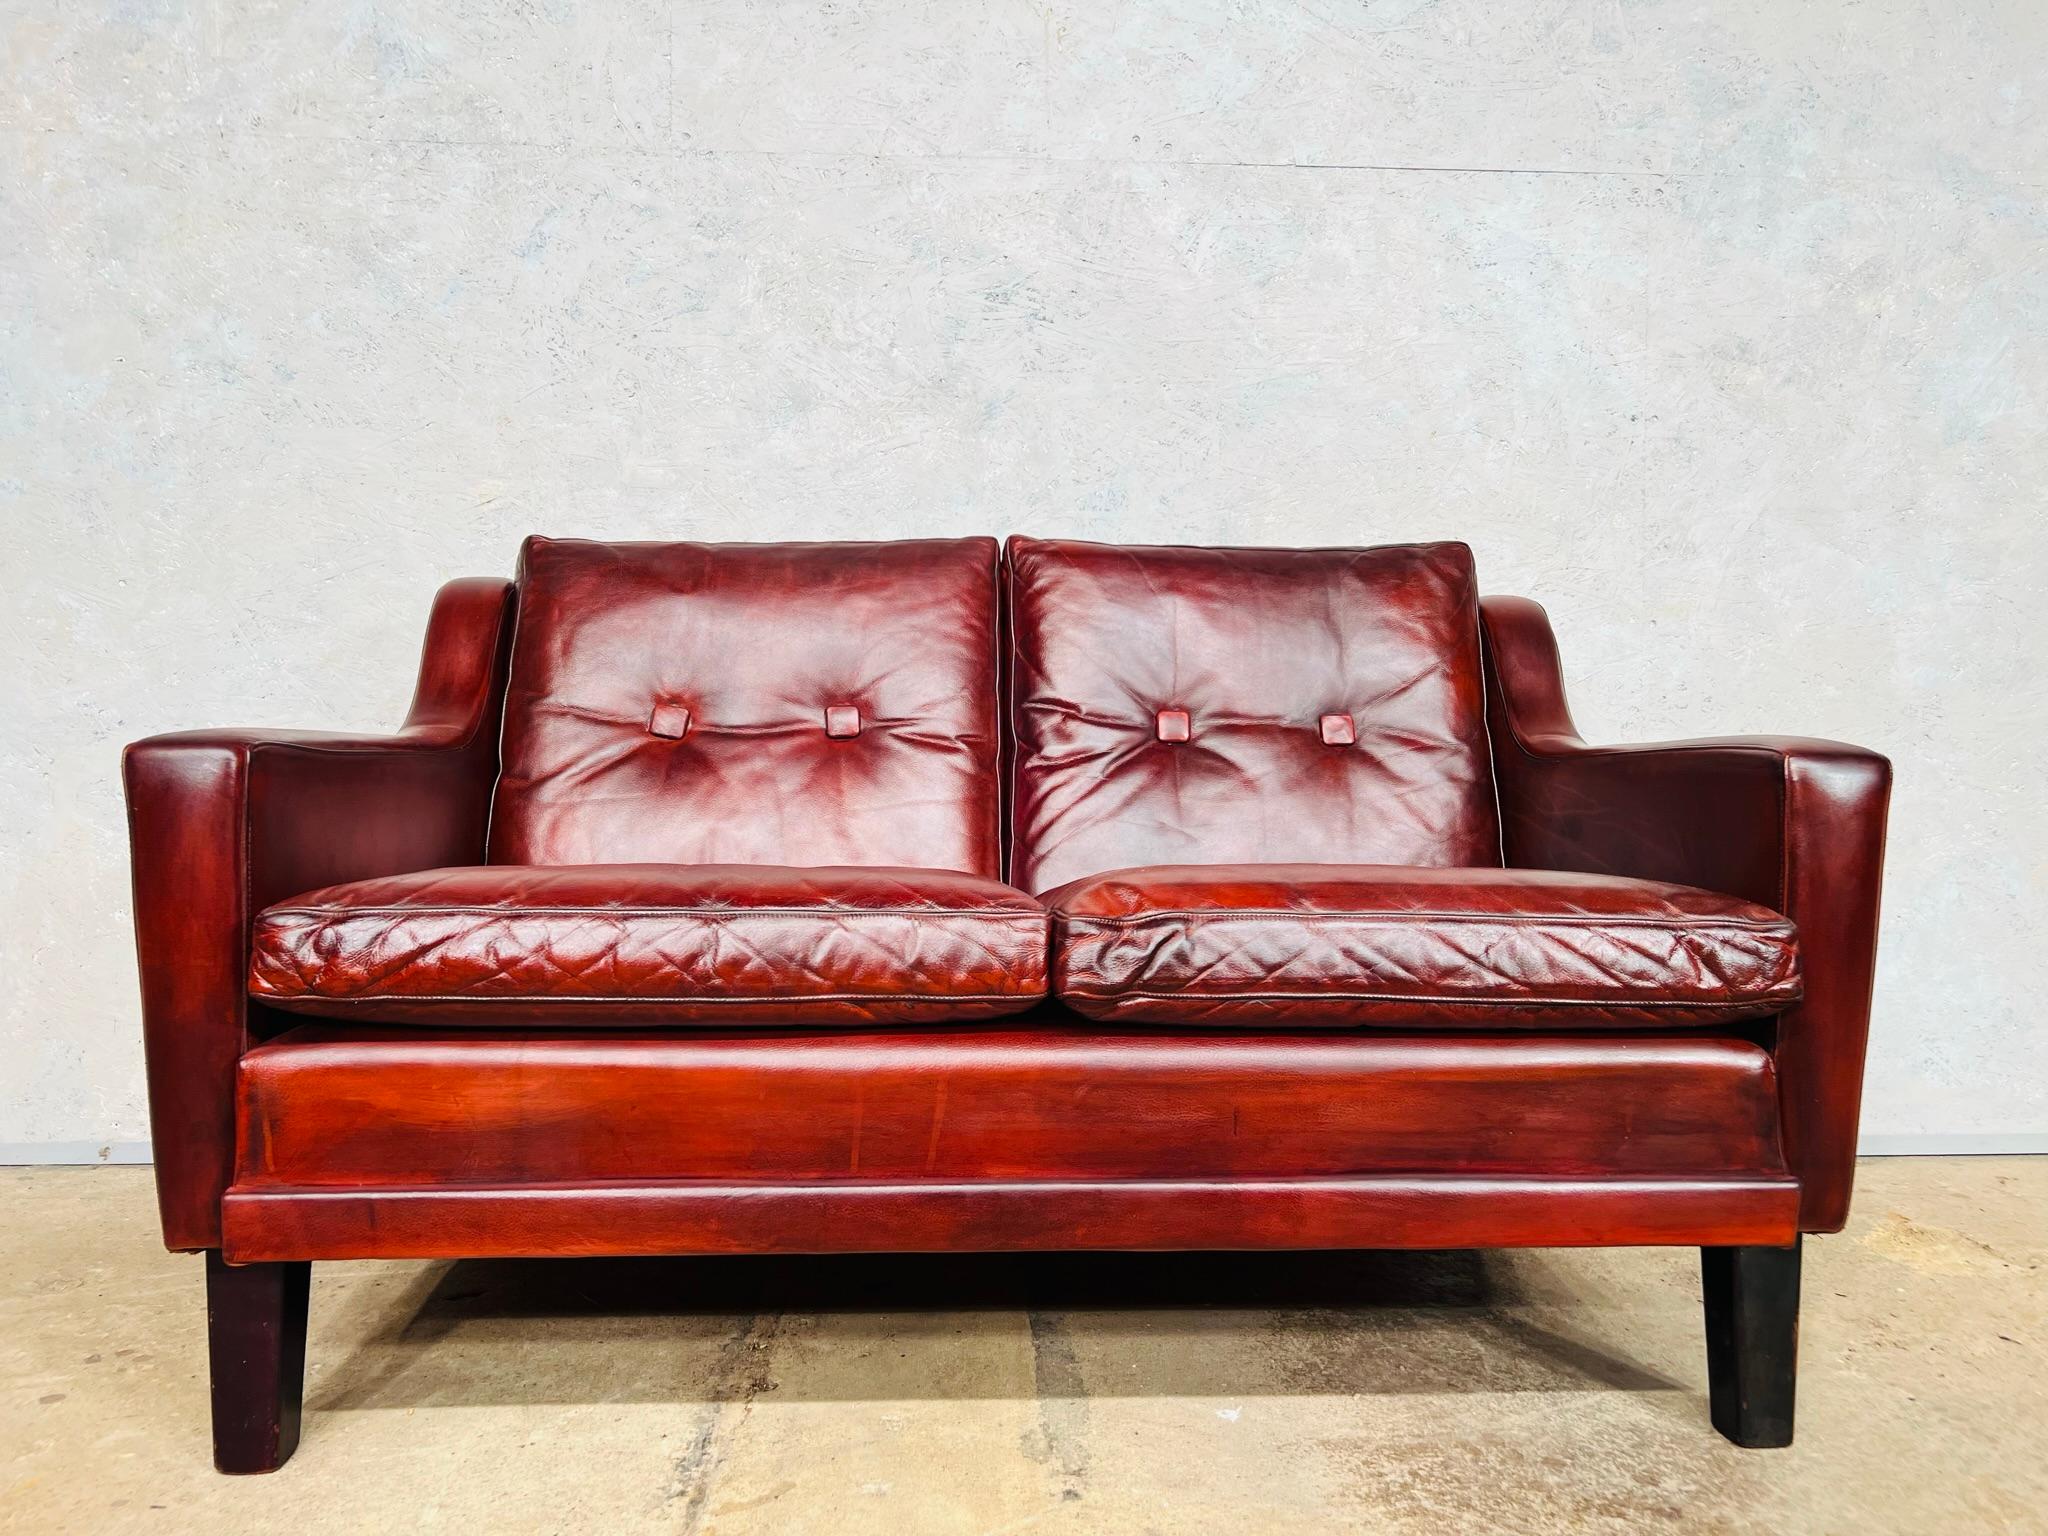 A very neat Danish 1970s sofa with buttoned cushions and great lines.

Stunning hand-dyed patinated deep chestnut brown color with great patina and finish.

